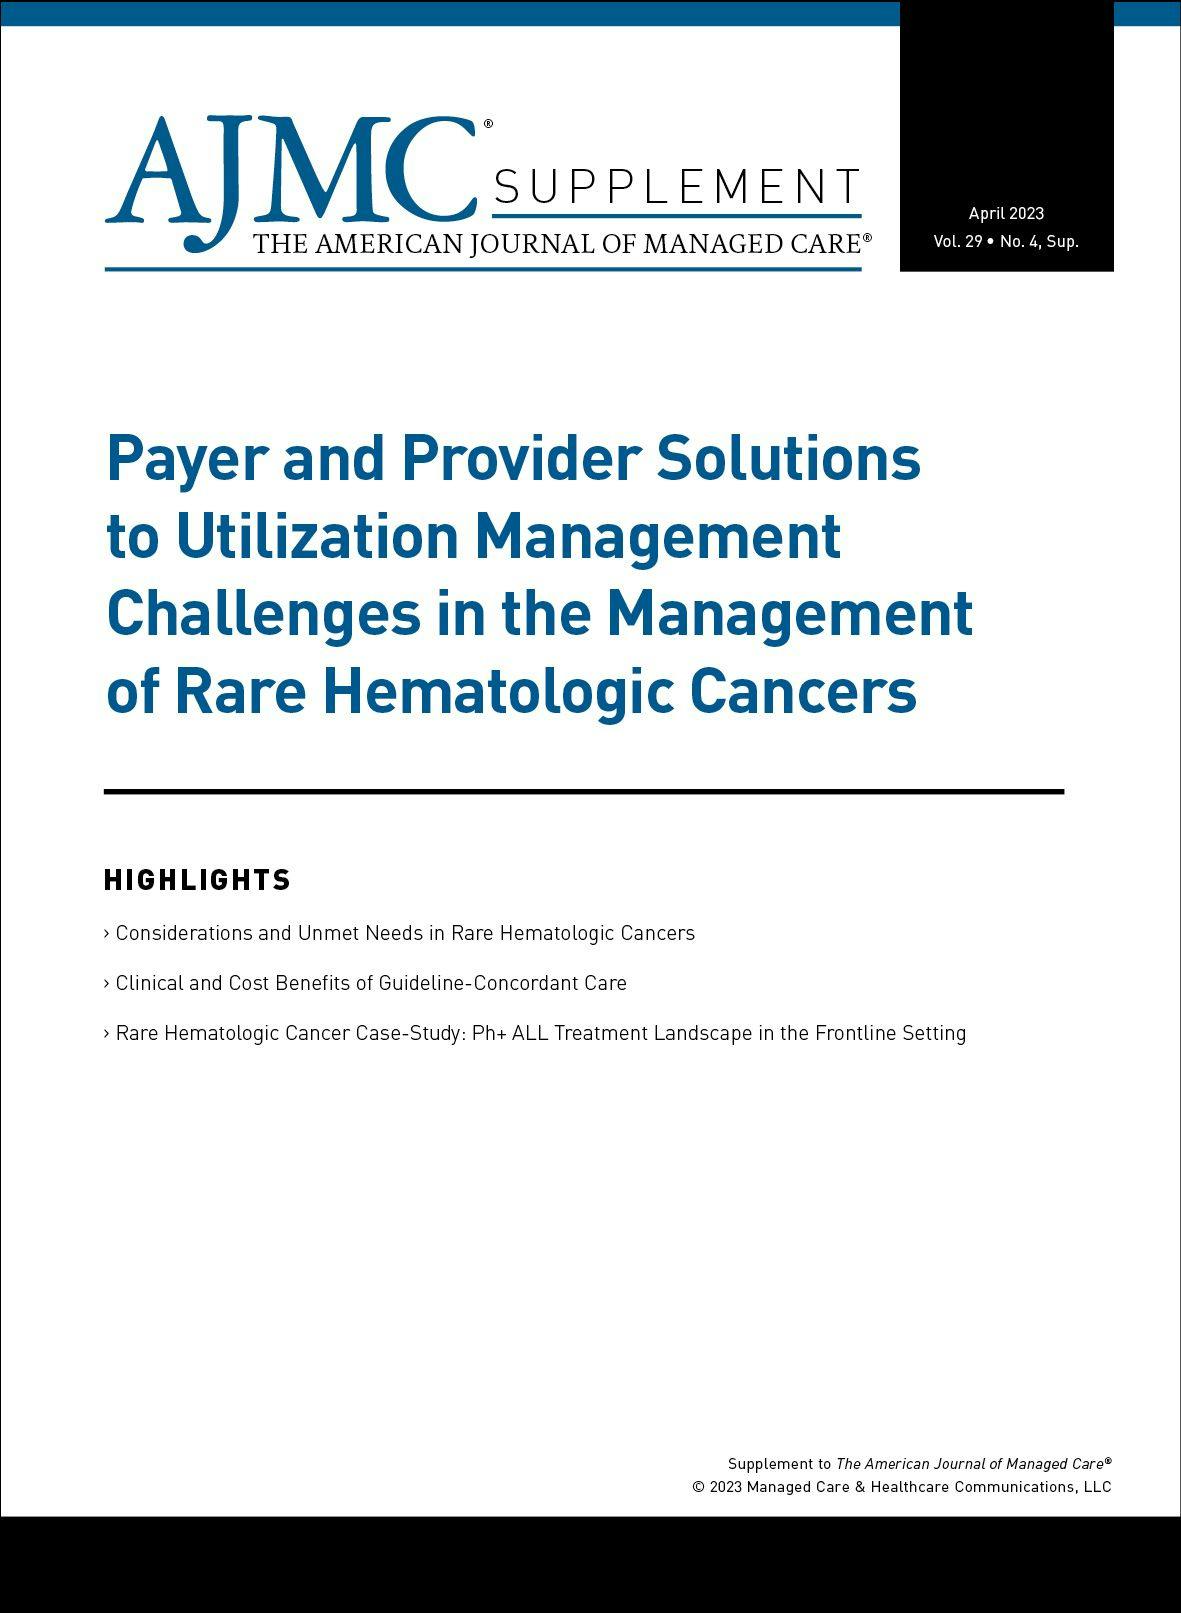 Payer and Provider Solutions to Utilization Management Challenges in the Management of Rare Hematologic Cancers